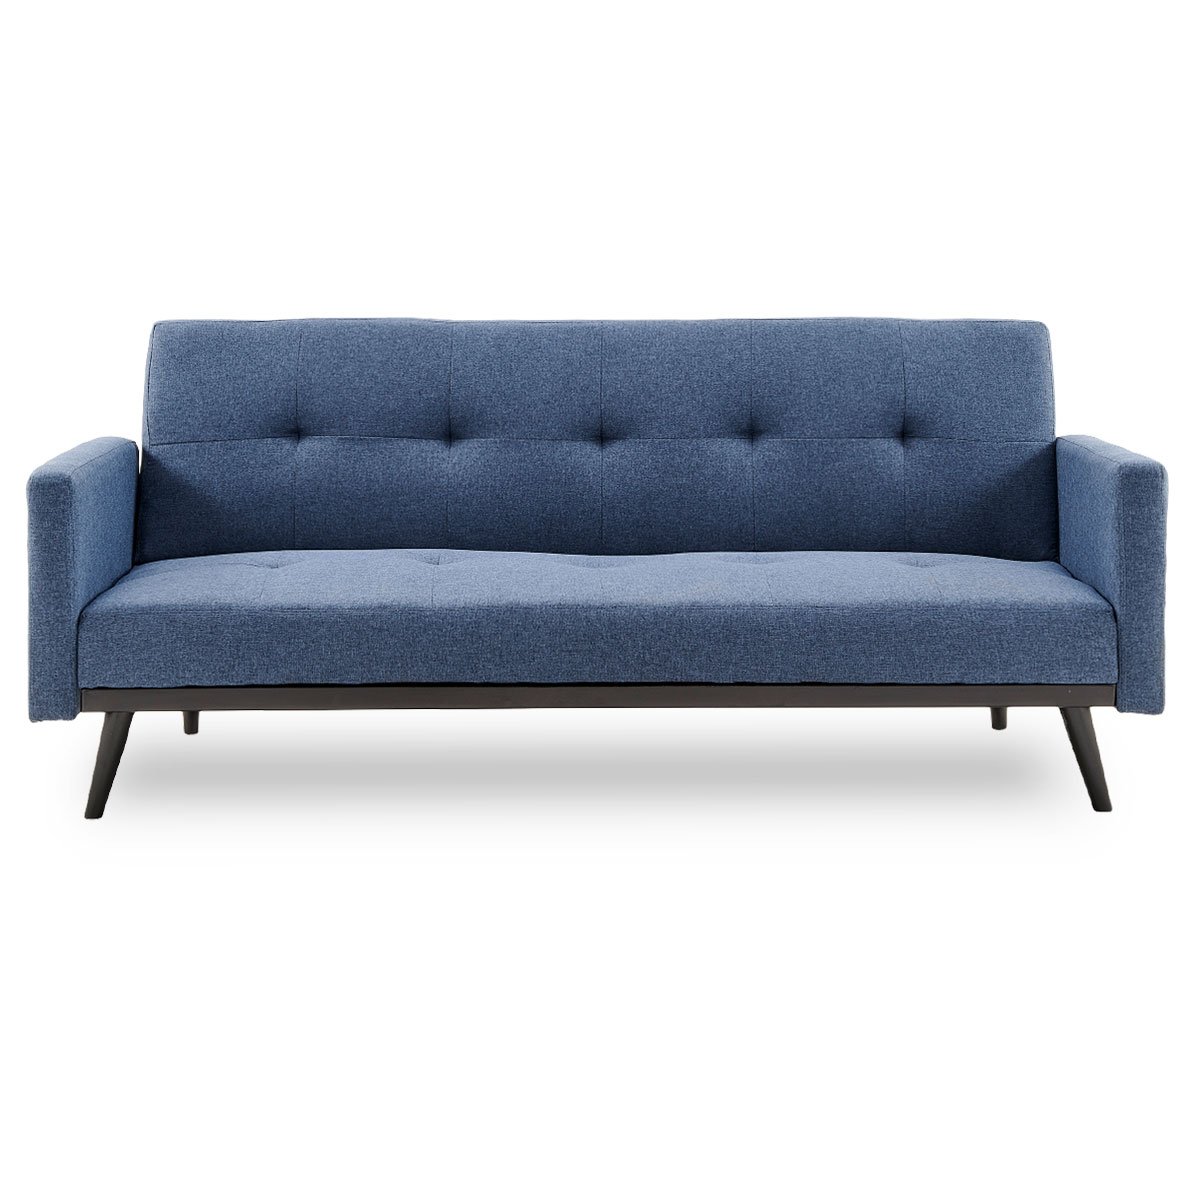 Sarantino Tufted Faux Linen 3-Seater Sofa Bed with Armrests - Blue 1